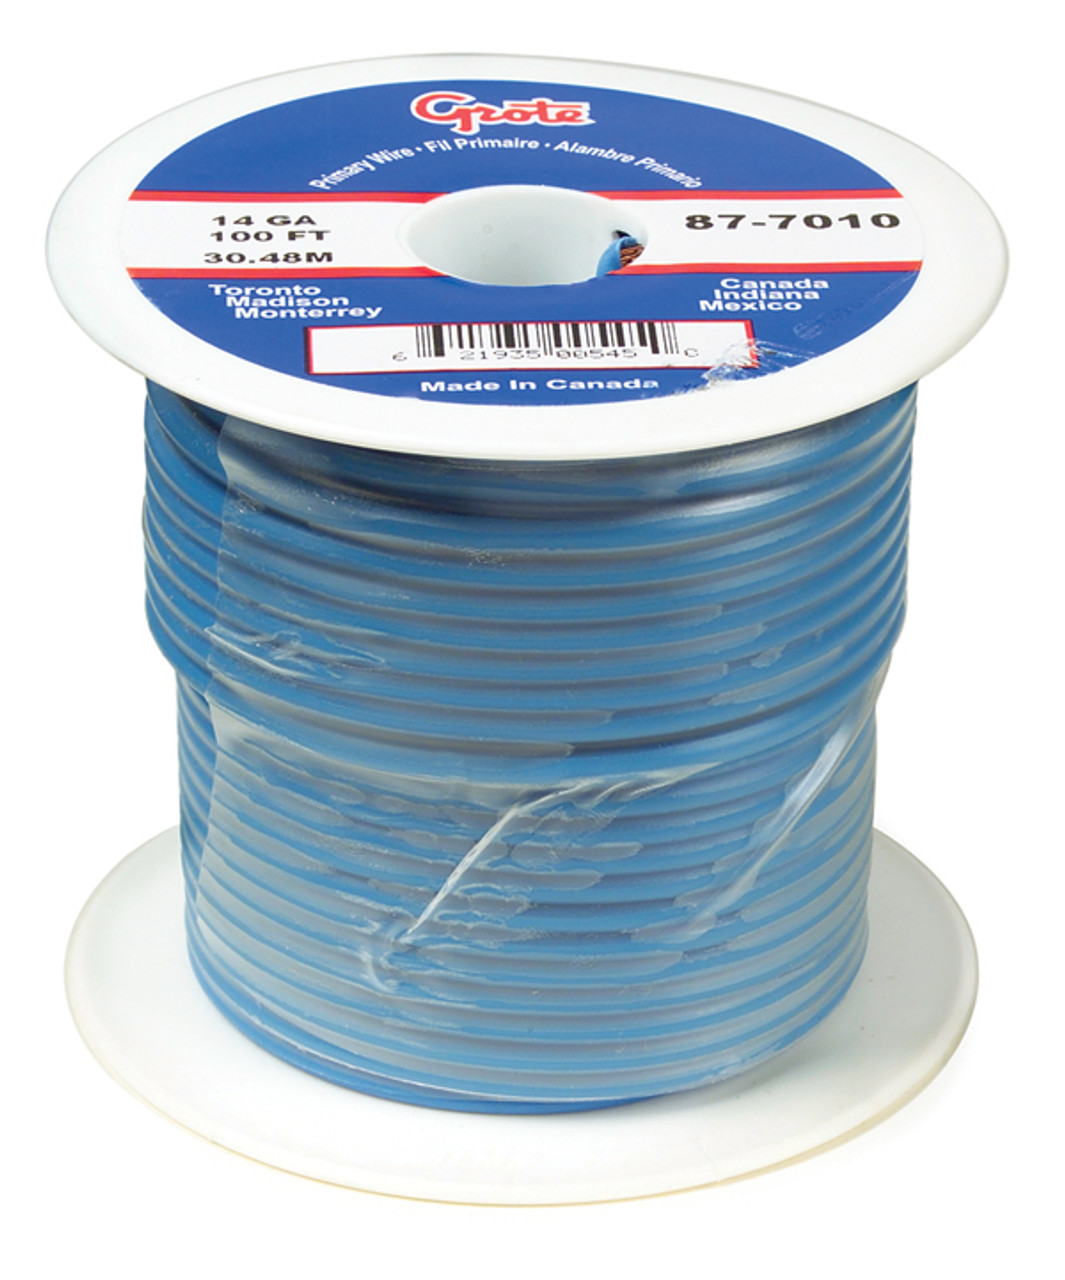 14 AWG General Purpose Thermo Plastic Wire @ 25' - Blue  89-7010